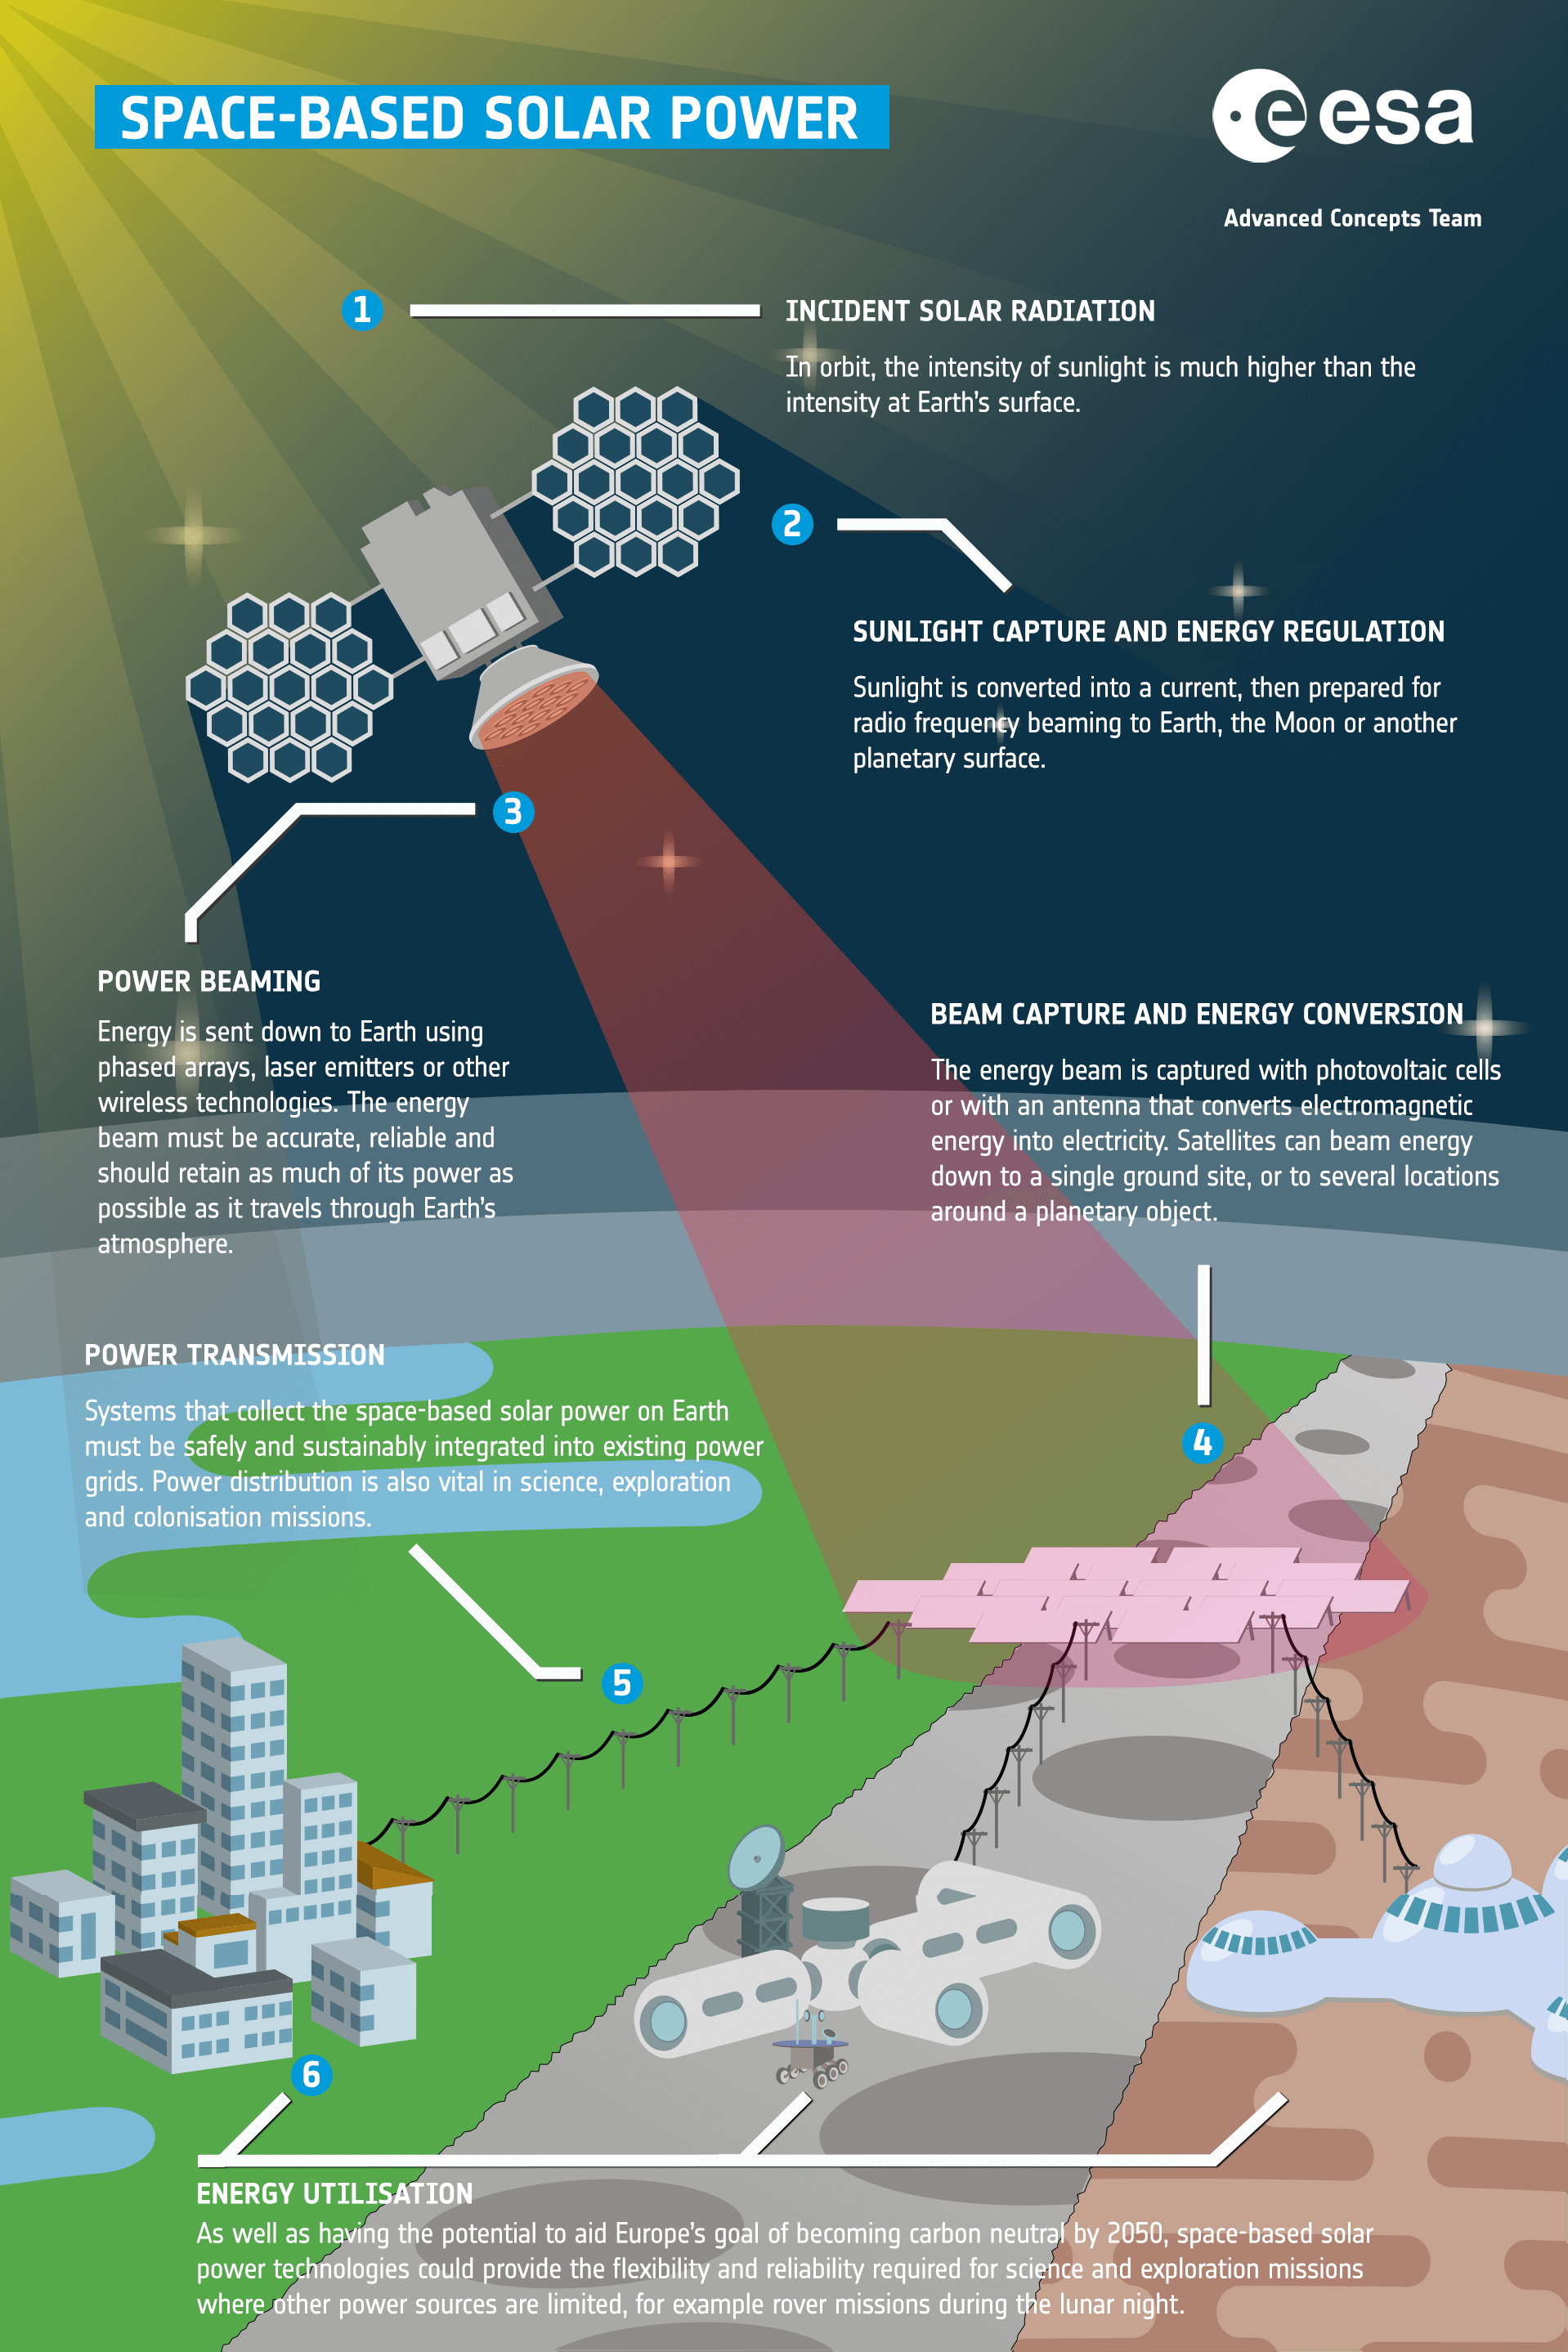 A model of how space-based solar power would work in practice.